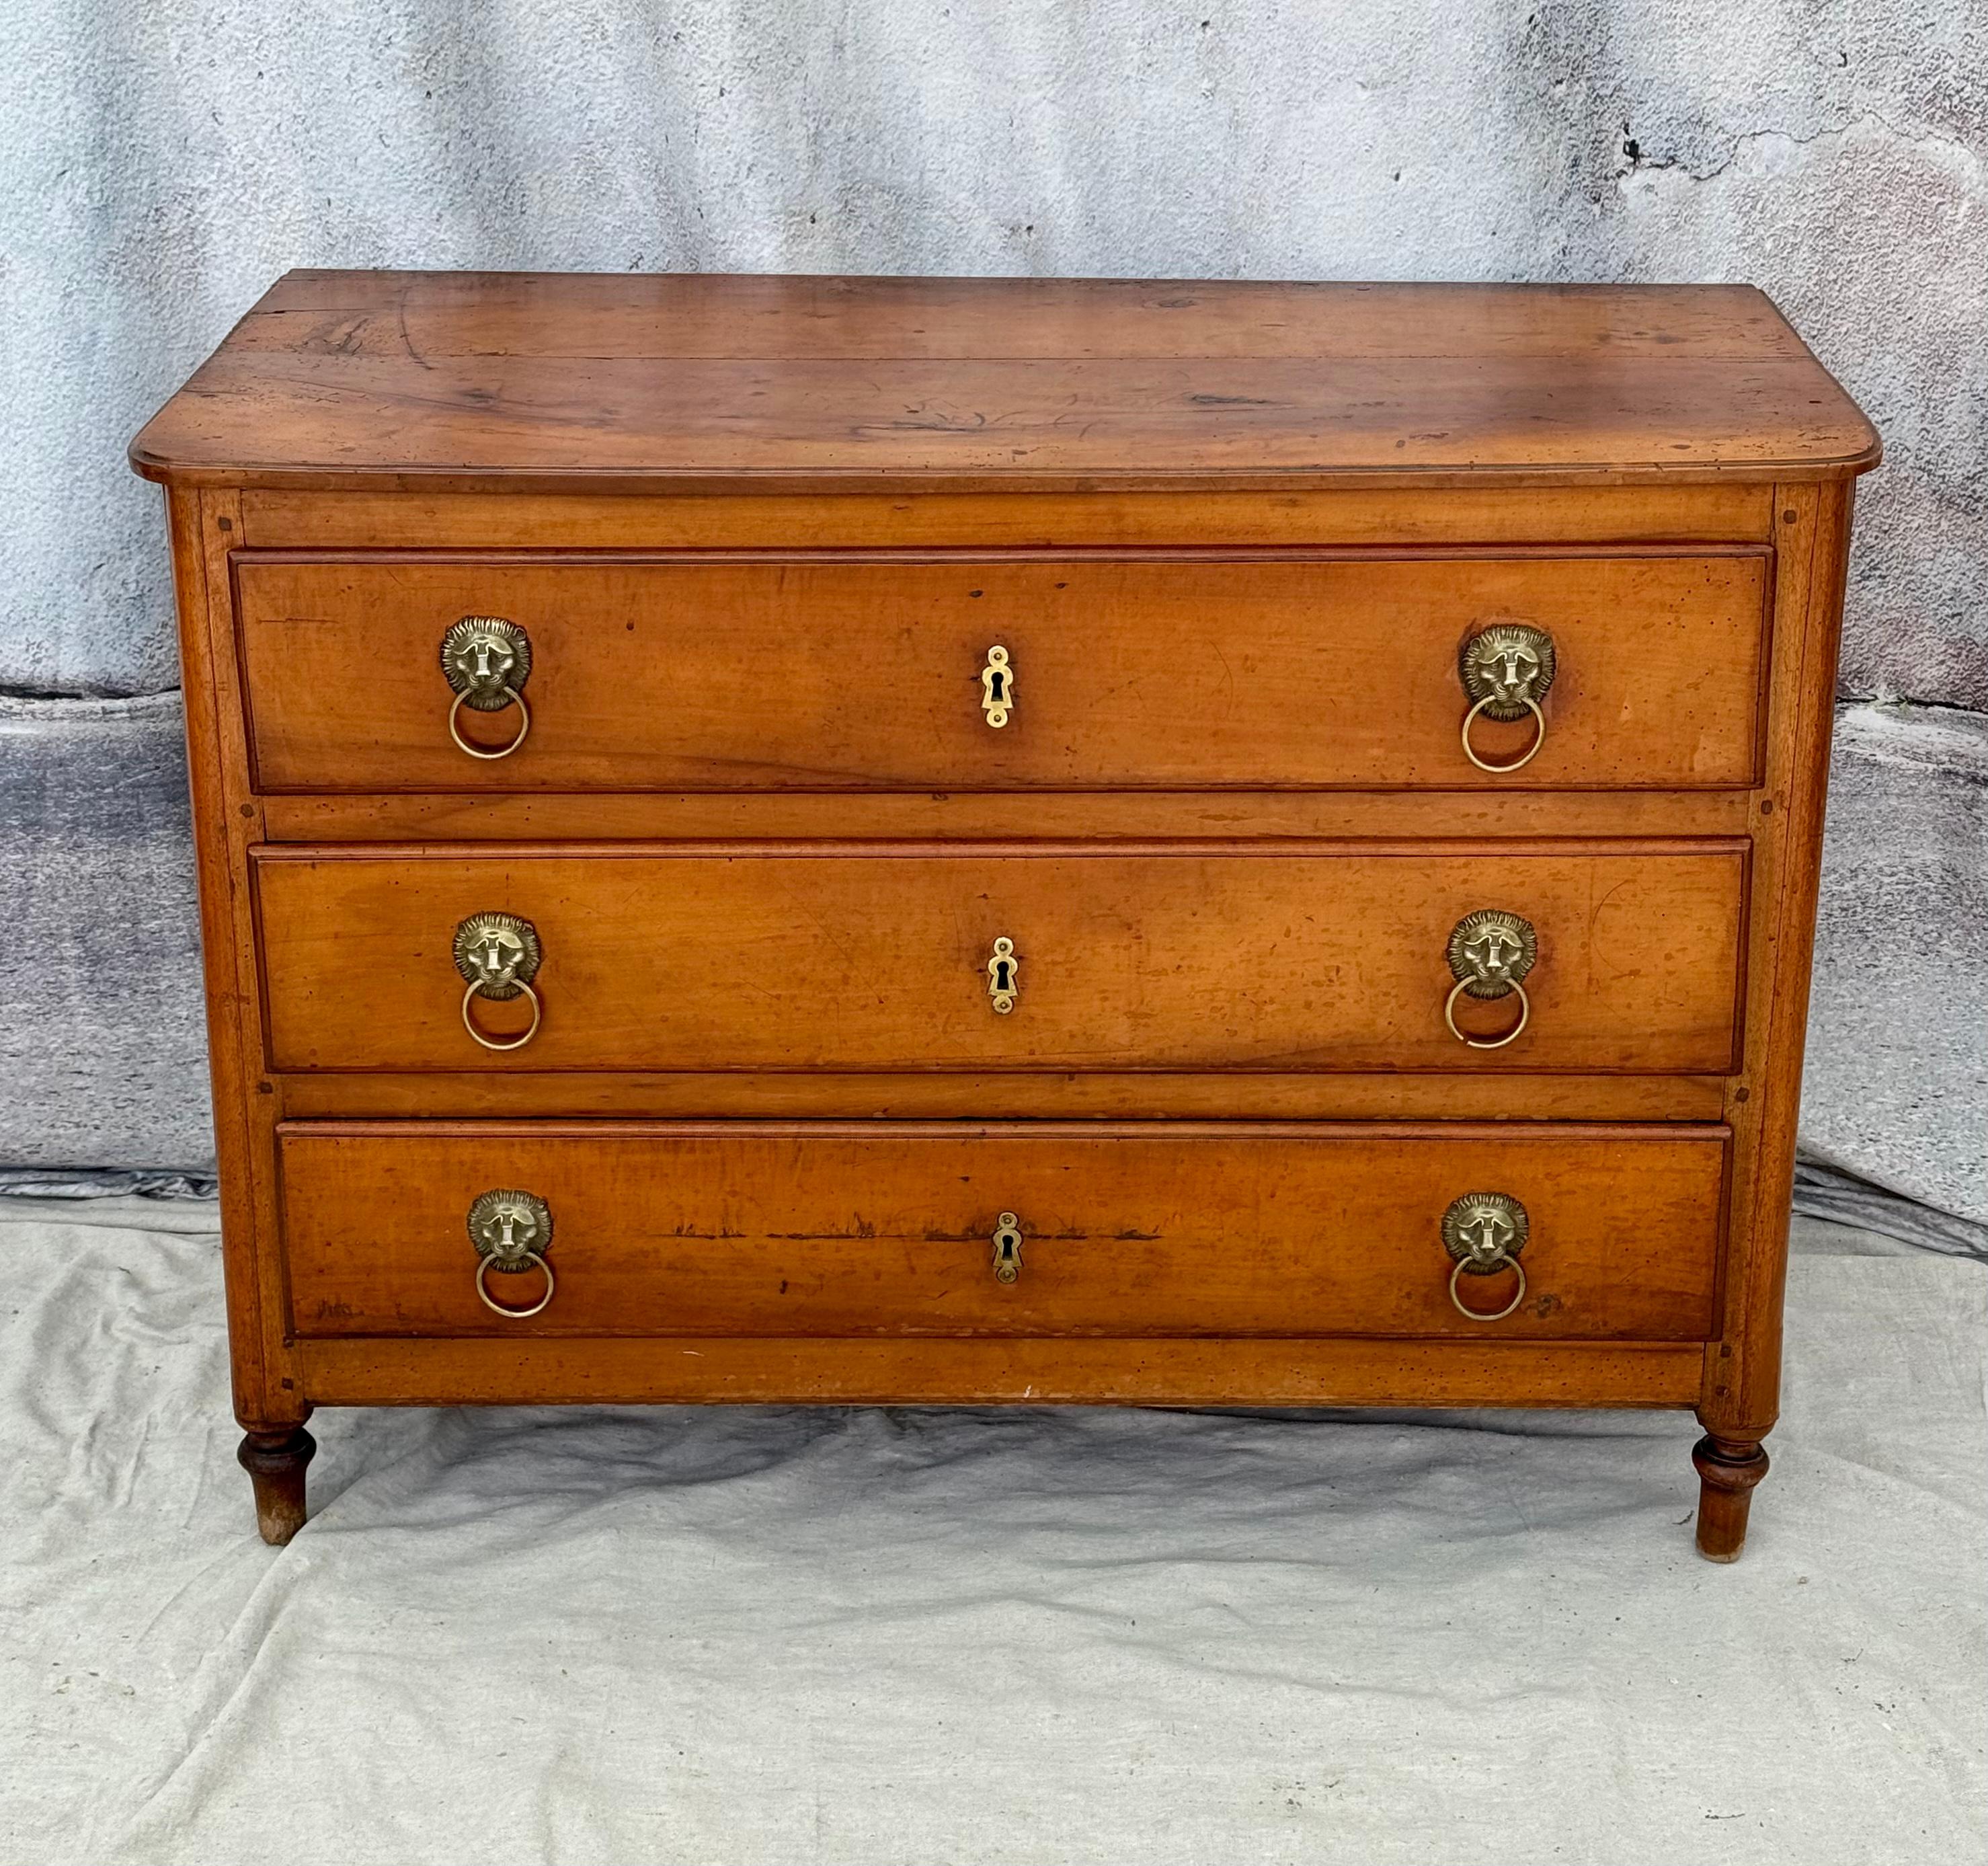 Early 19th century French Provincial Directoire chest. Chest features three drawers with lion head pulls, all rising on turned legs. Wonderful old finish with a mellow patina.